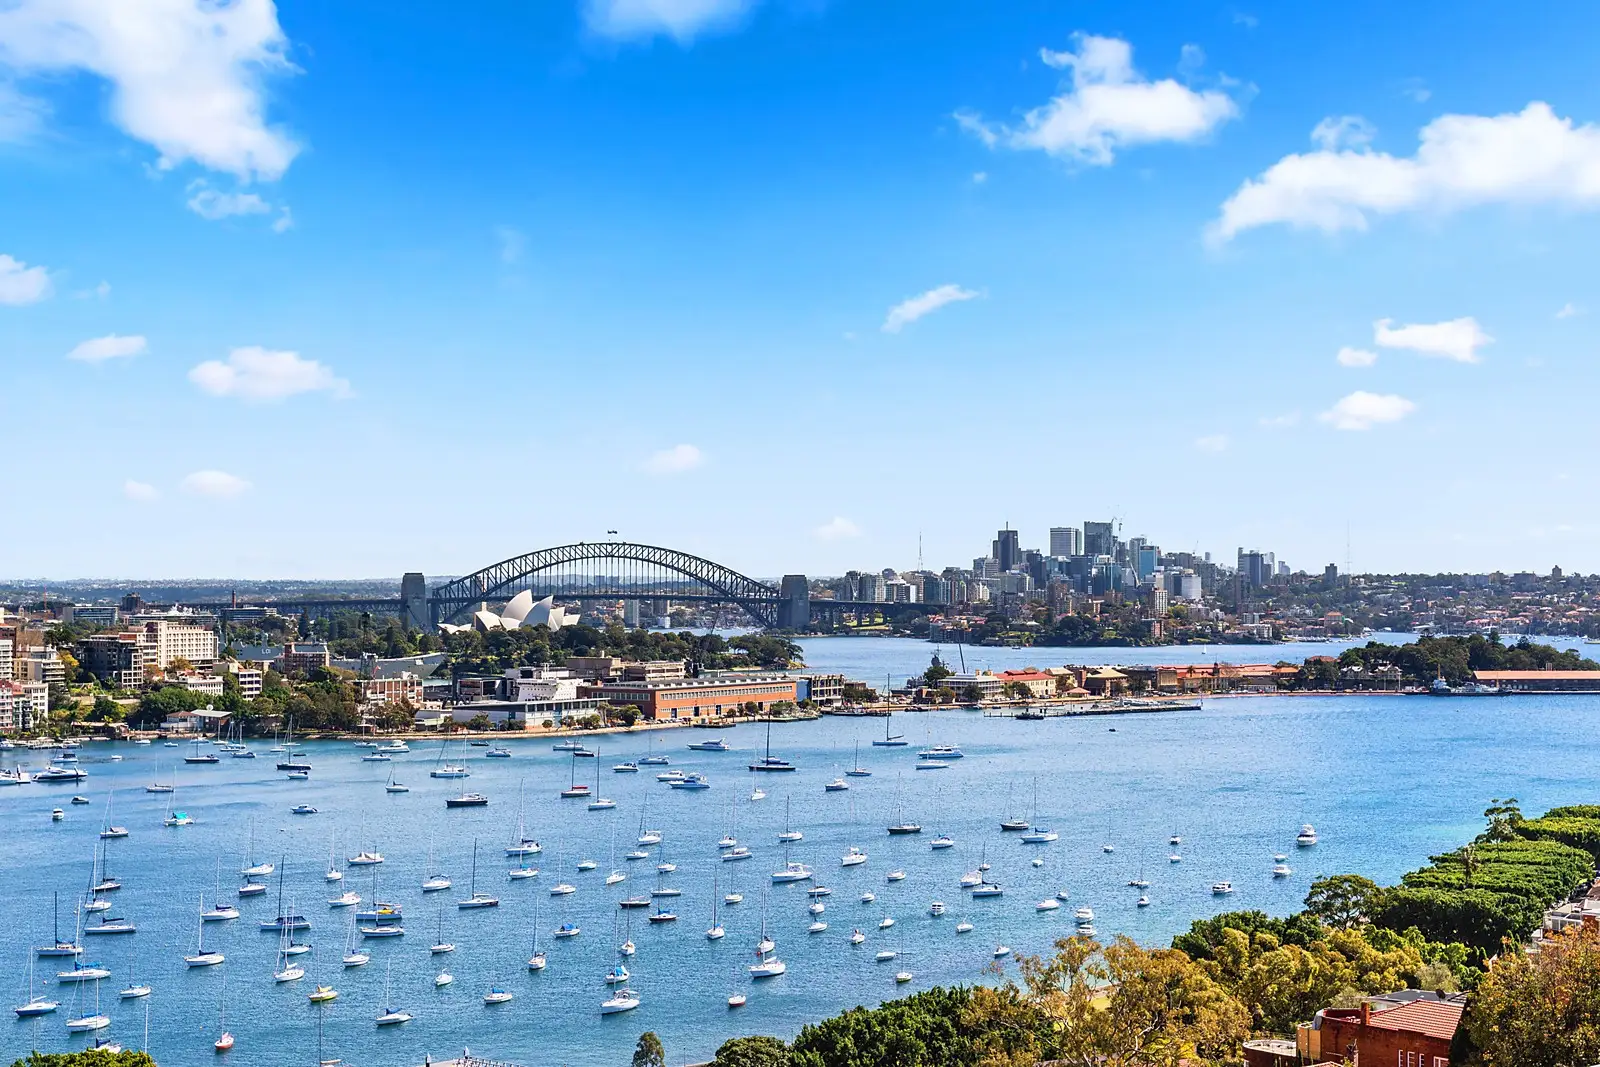 Photo #3: 9/75-79 Darling Point Road, Darling Point - Sold by Sydney Sotheby's International Realty